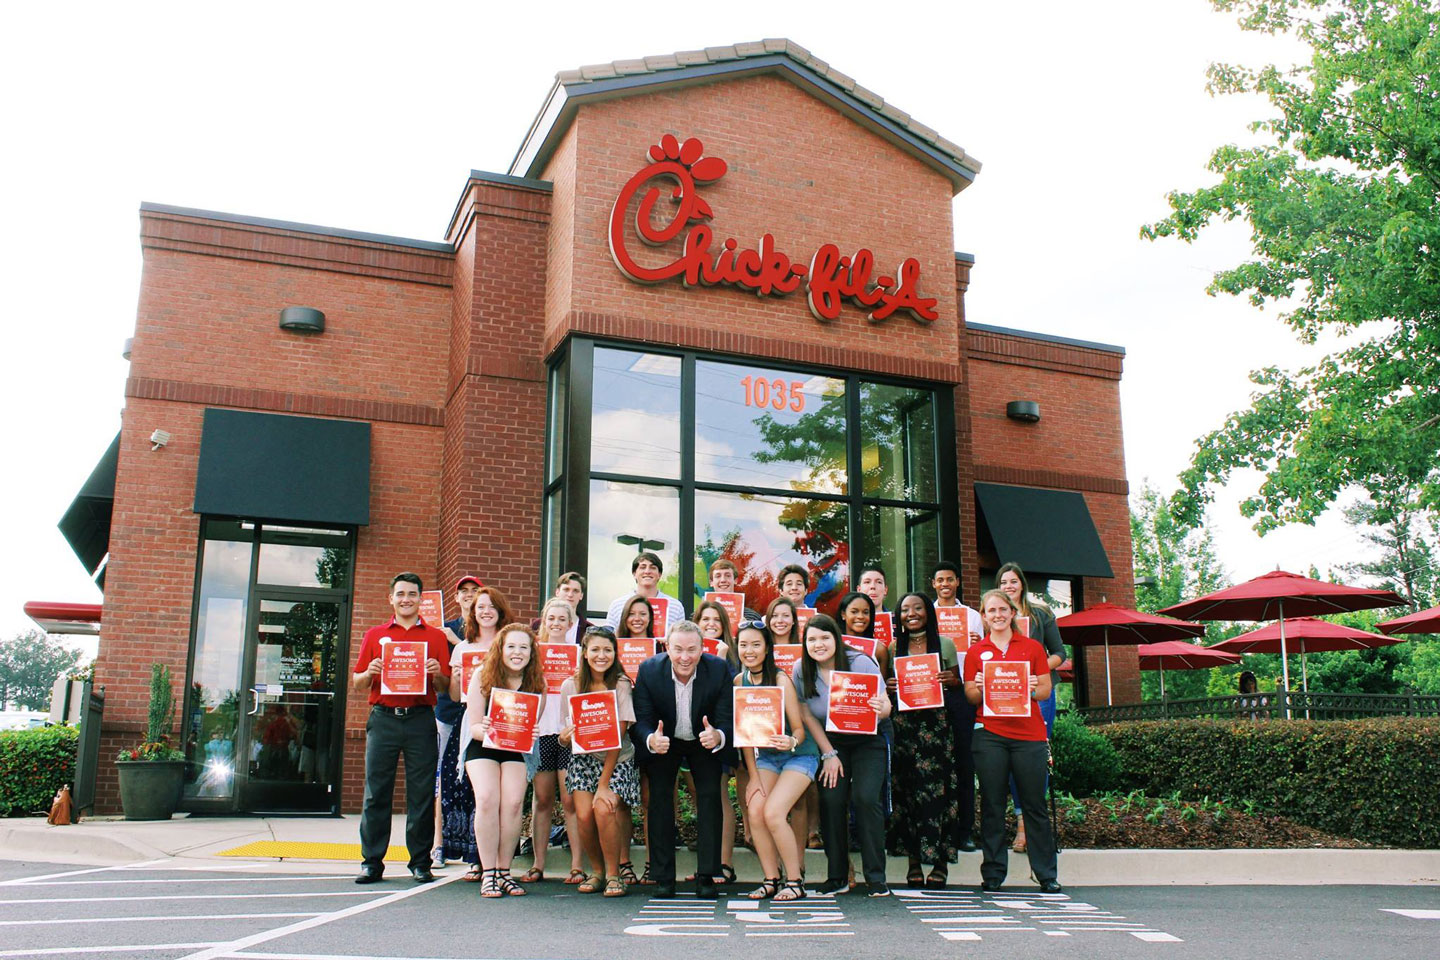 What to Know About Chick-fil-A’s Scholarship Program